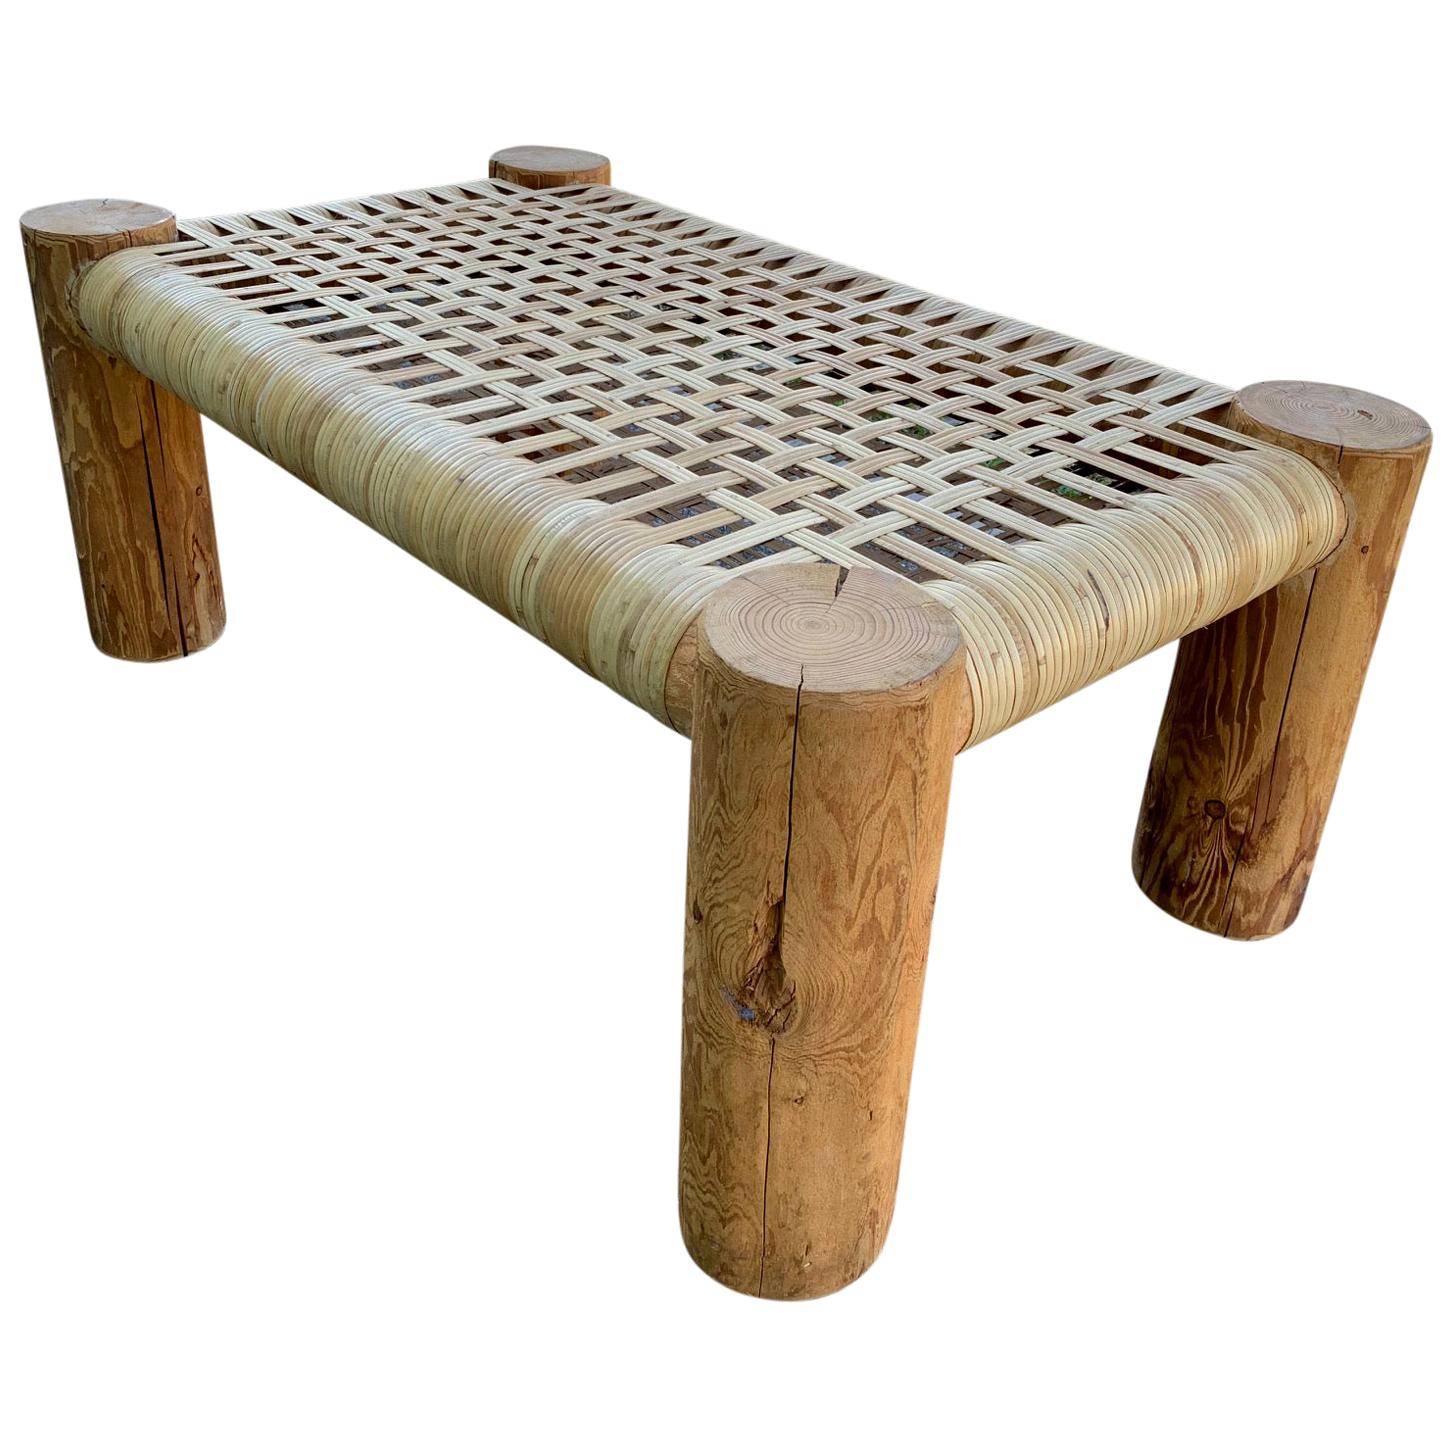 Cane Wicker Wrapped Modern Rustic Wood Bench Table